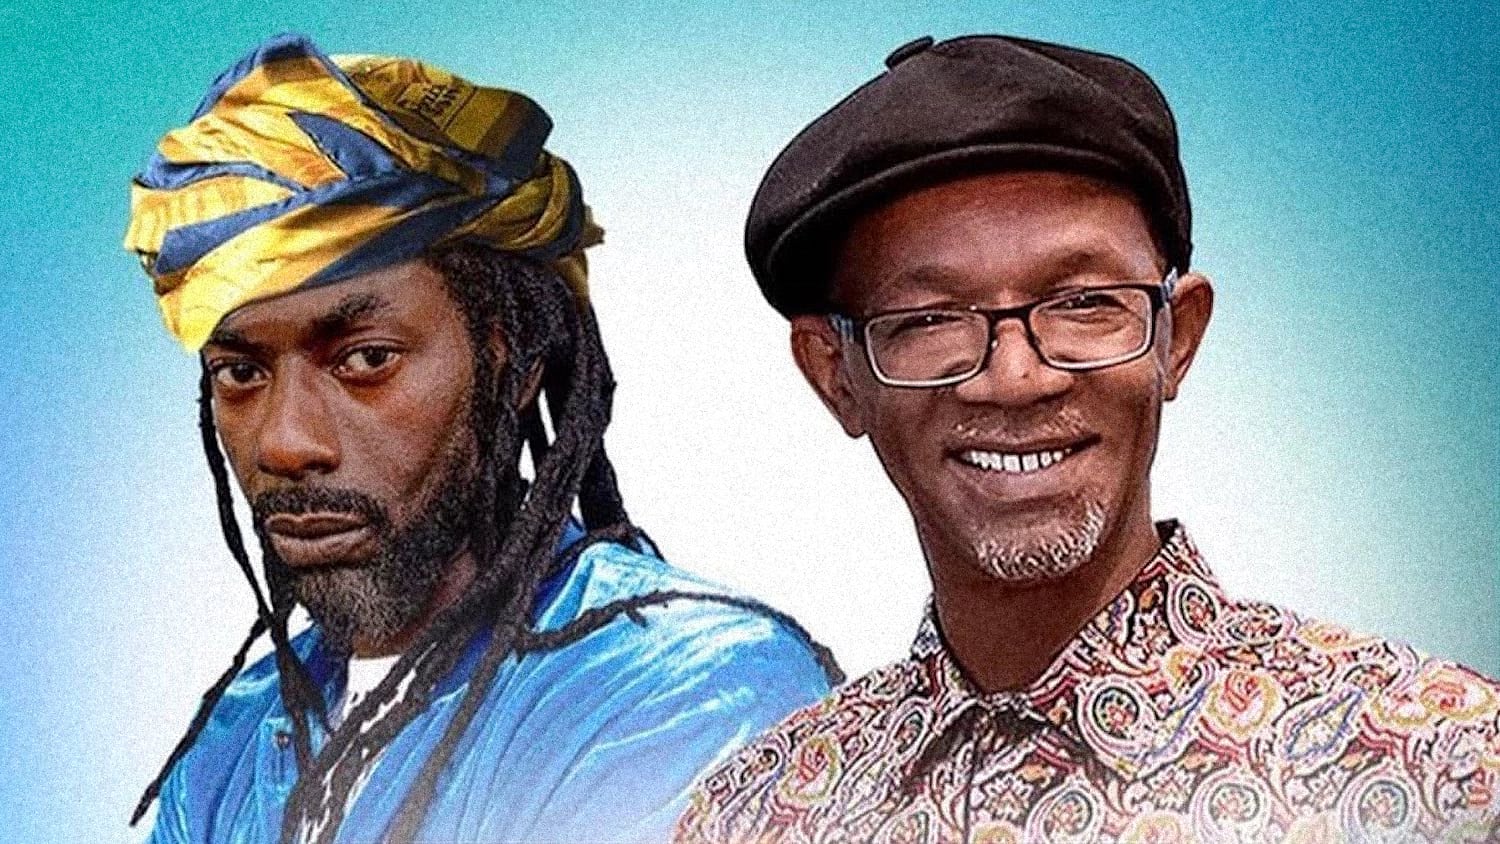 Buju Banton and Beres Hammond to Perform Together at New Years Concert Intimate